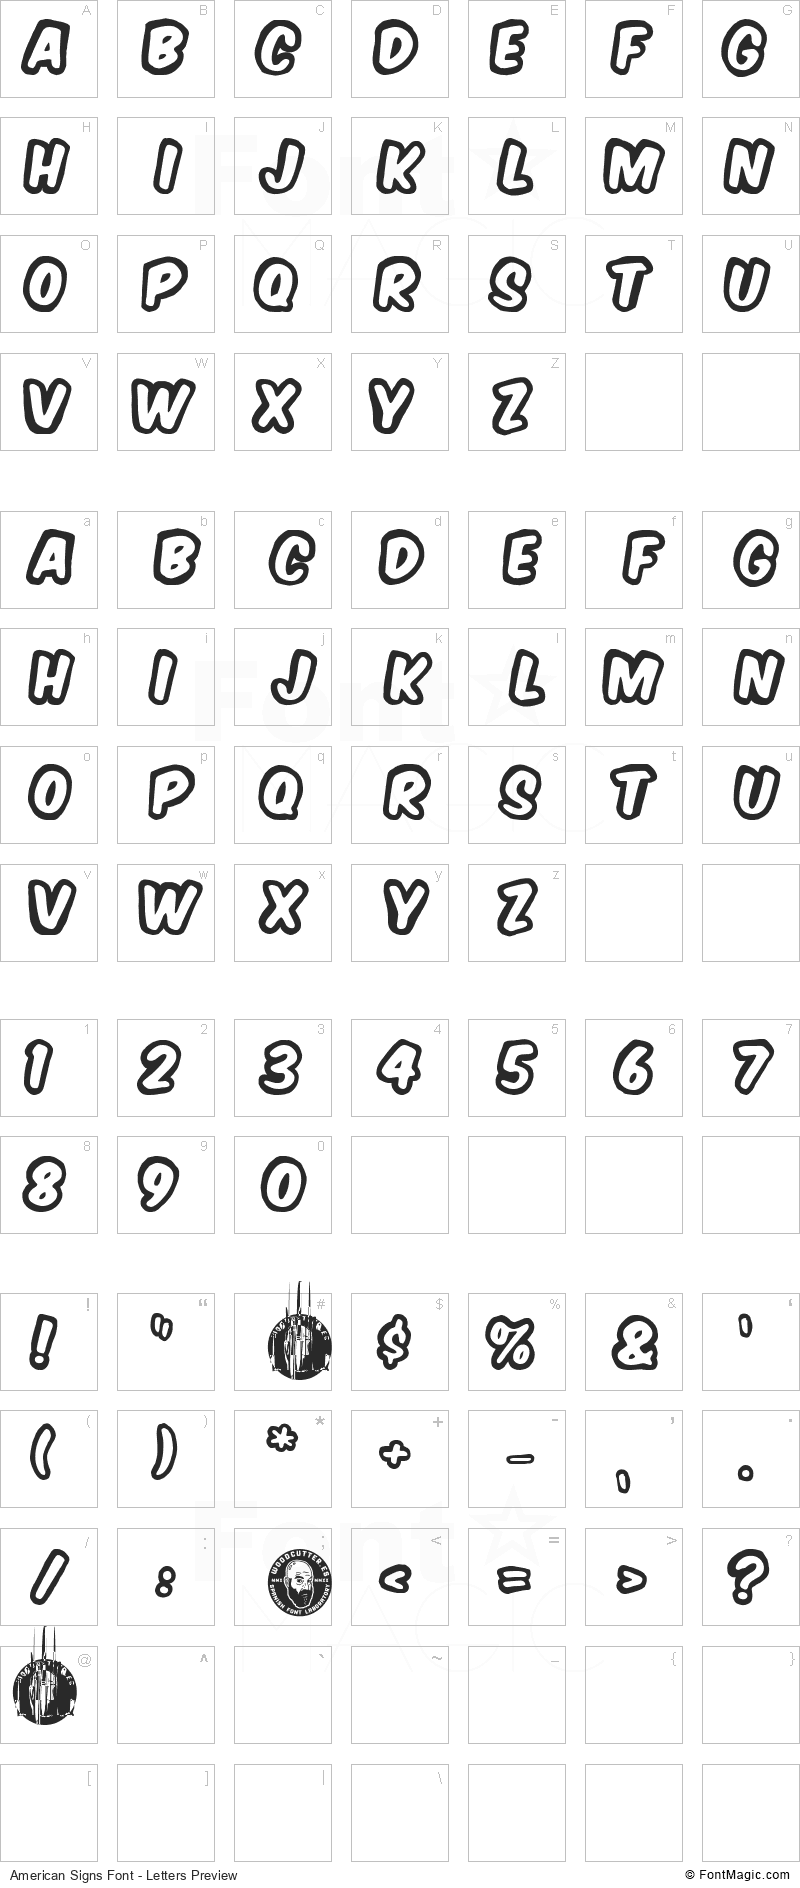 American Signs Font - All Latters Preview Chart